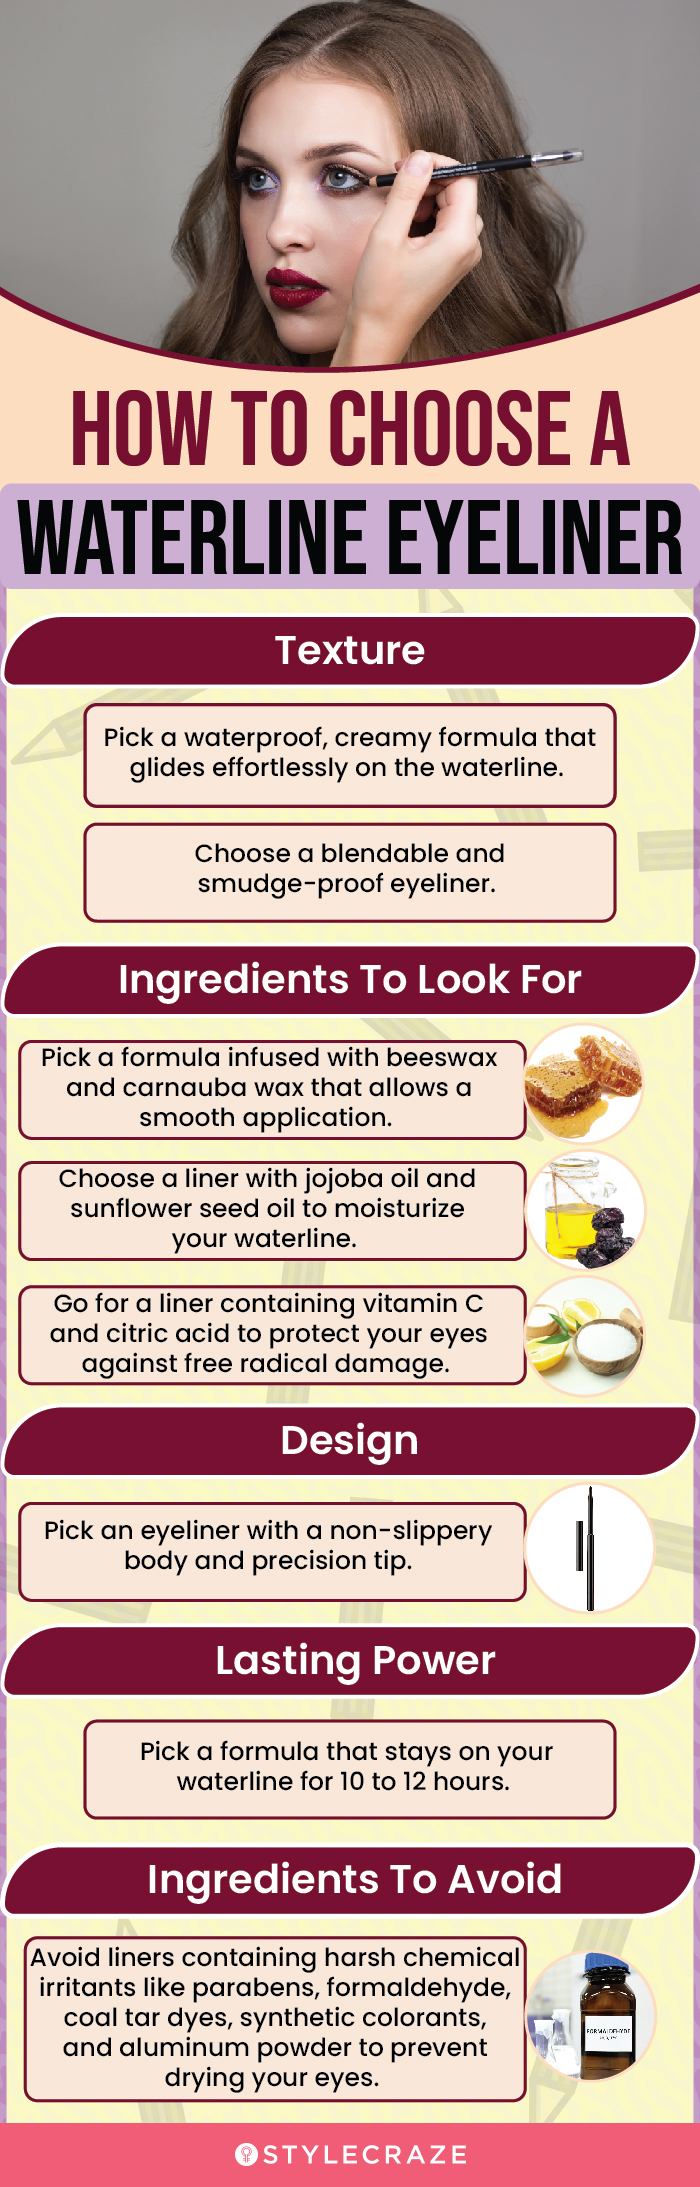 How To Choose A Waterline Eyeliner (infographic)